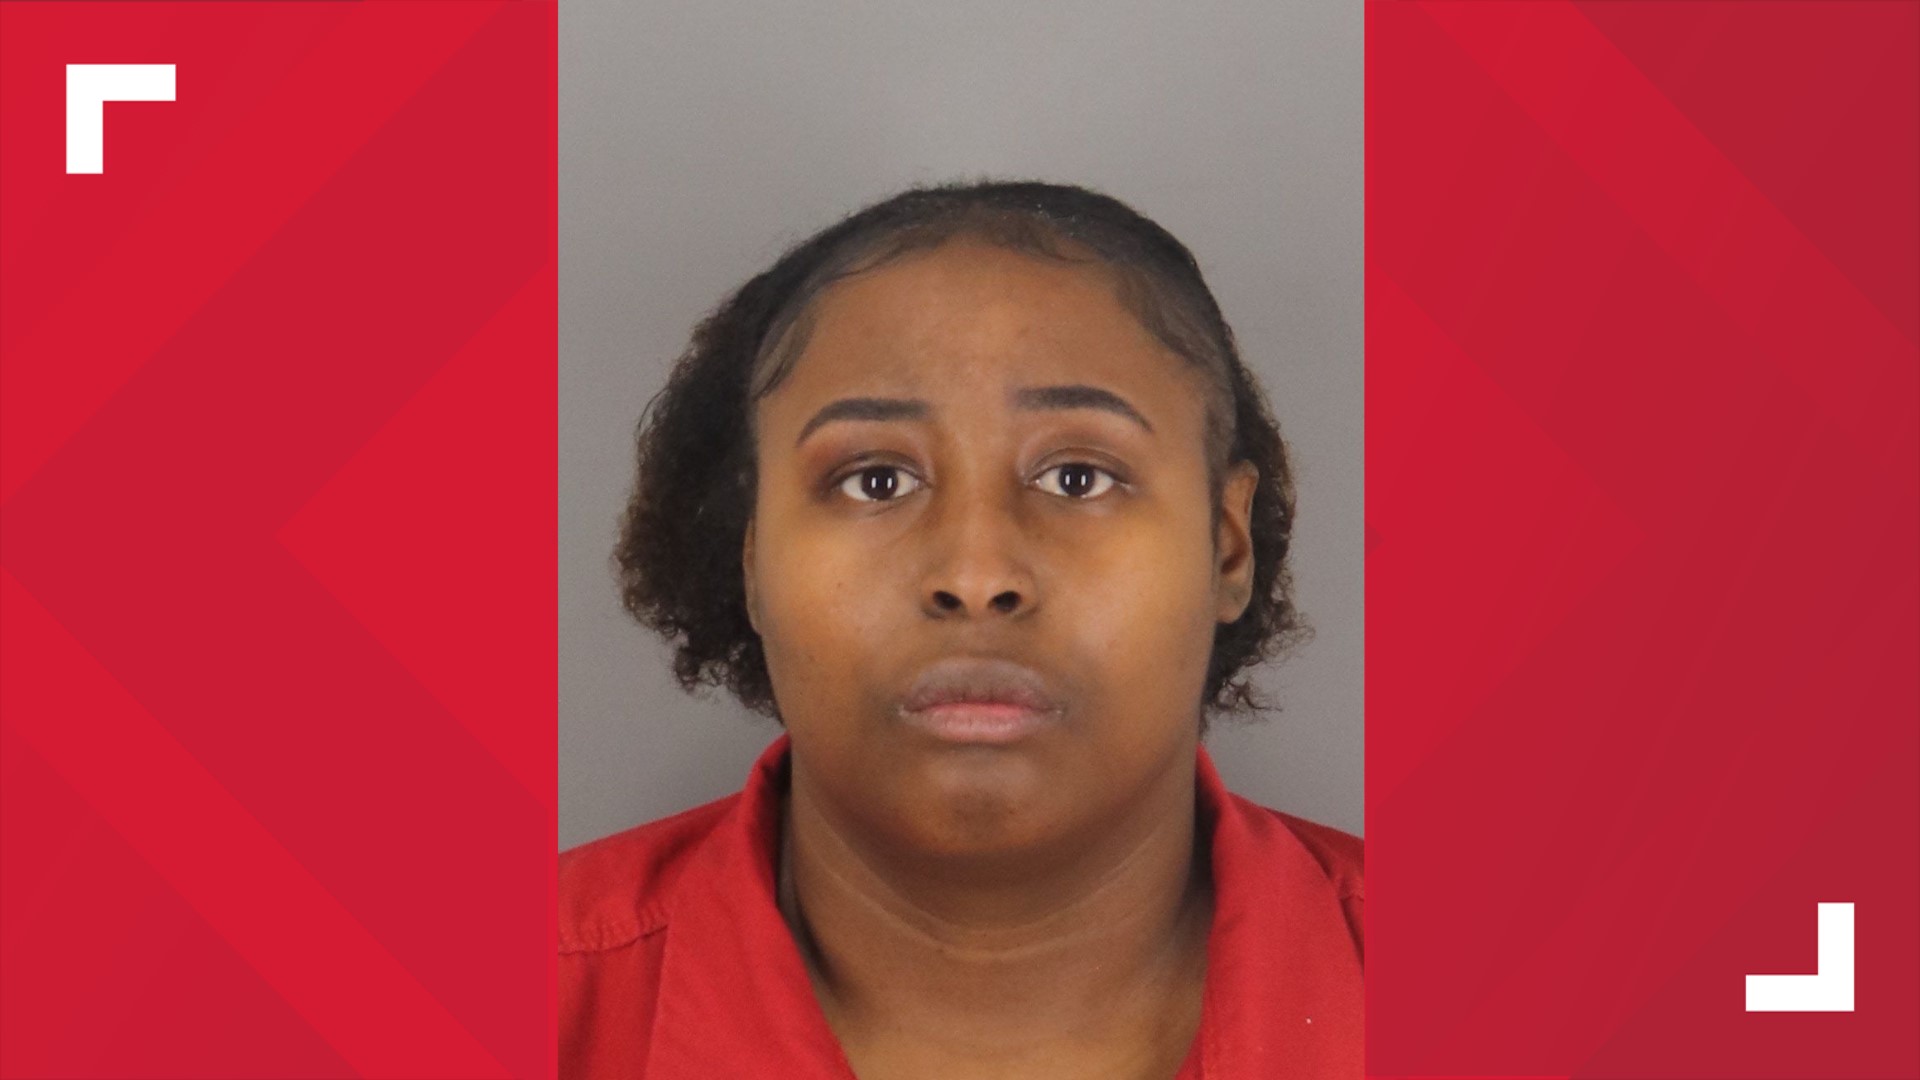 Officials say former corrections officer Aliea Hemphill smuggled drugs into the jail by soaking notebook paper with dissolvable narcotics.